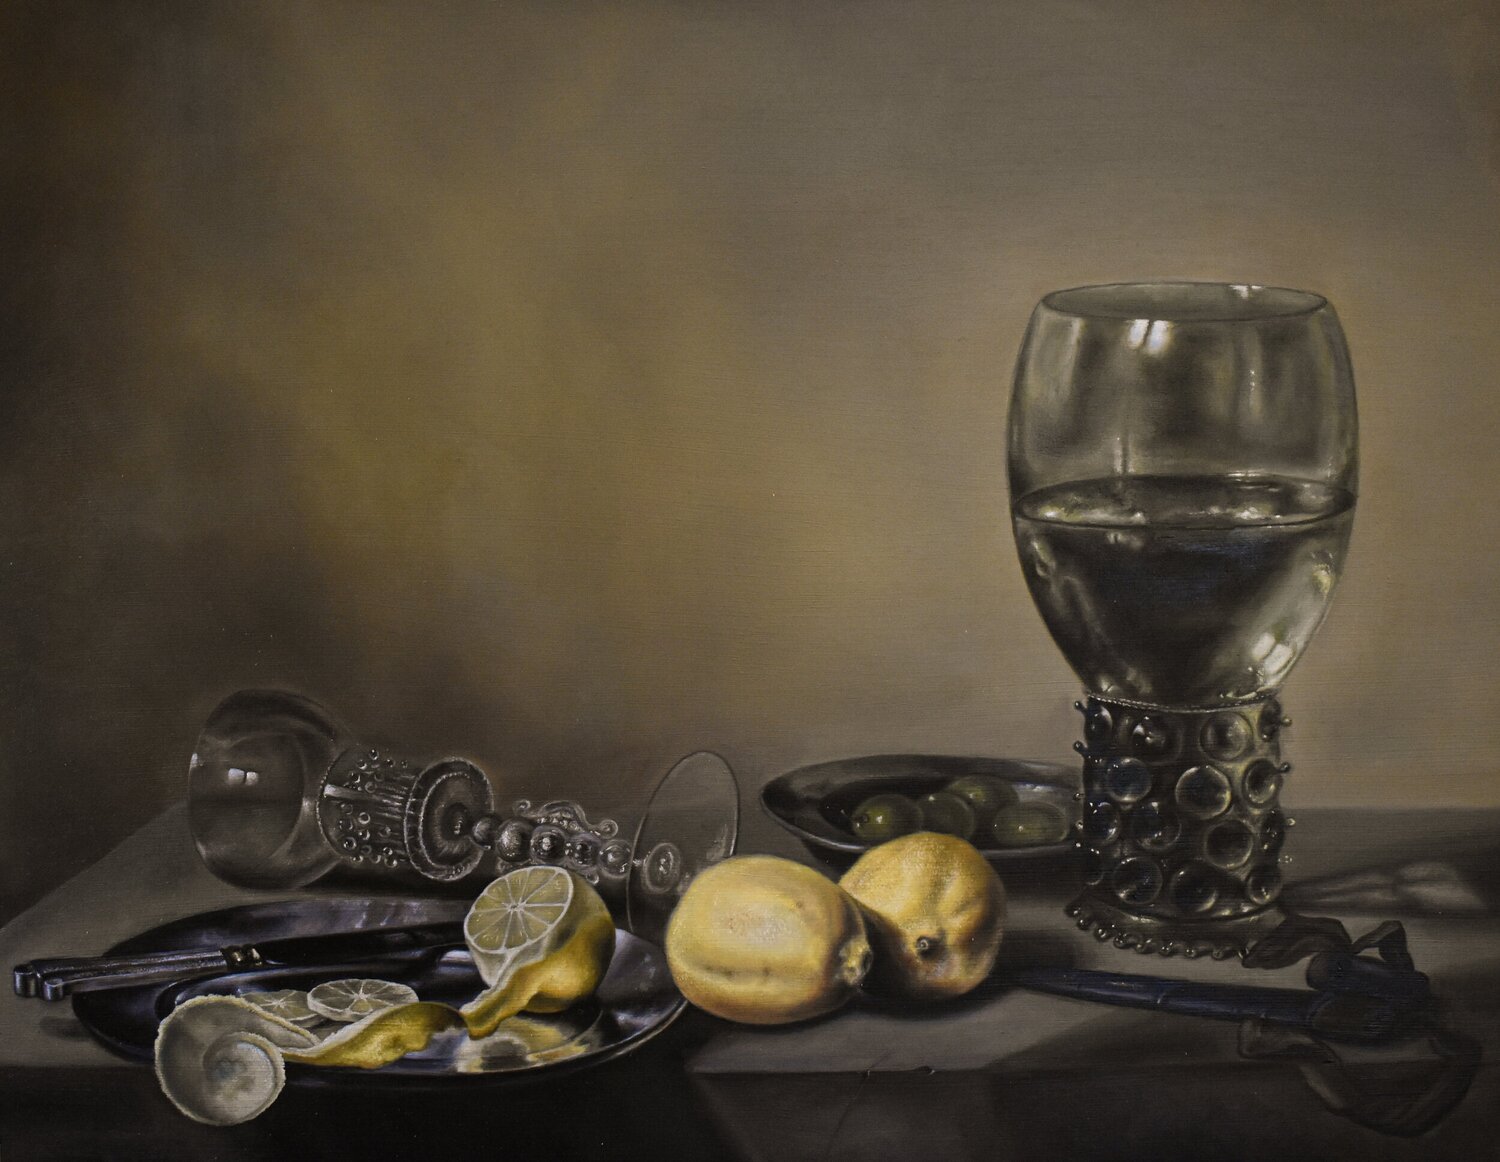    Still life with Lemons, Olives and Roemer (after Pieter Claesz)    Oil on panel, 16x20" 